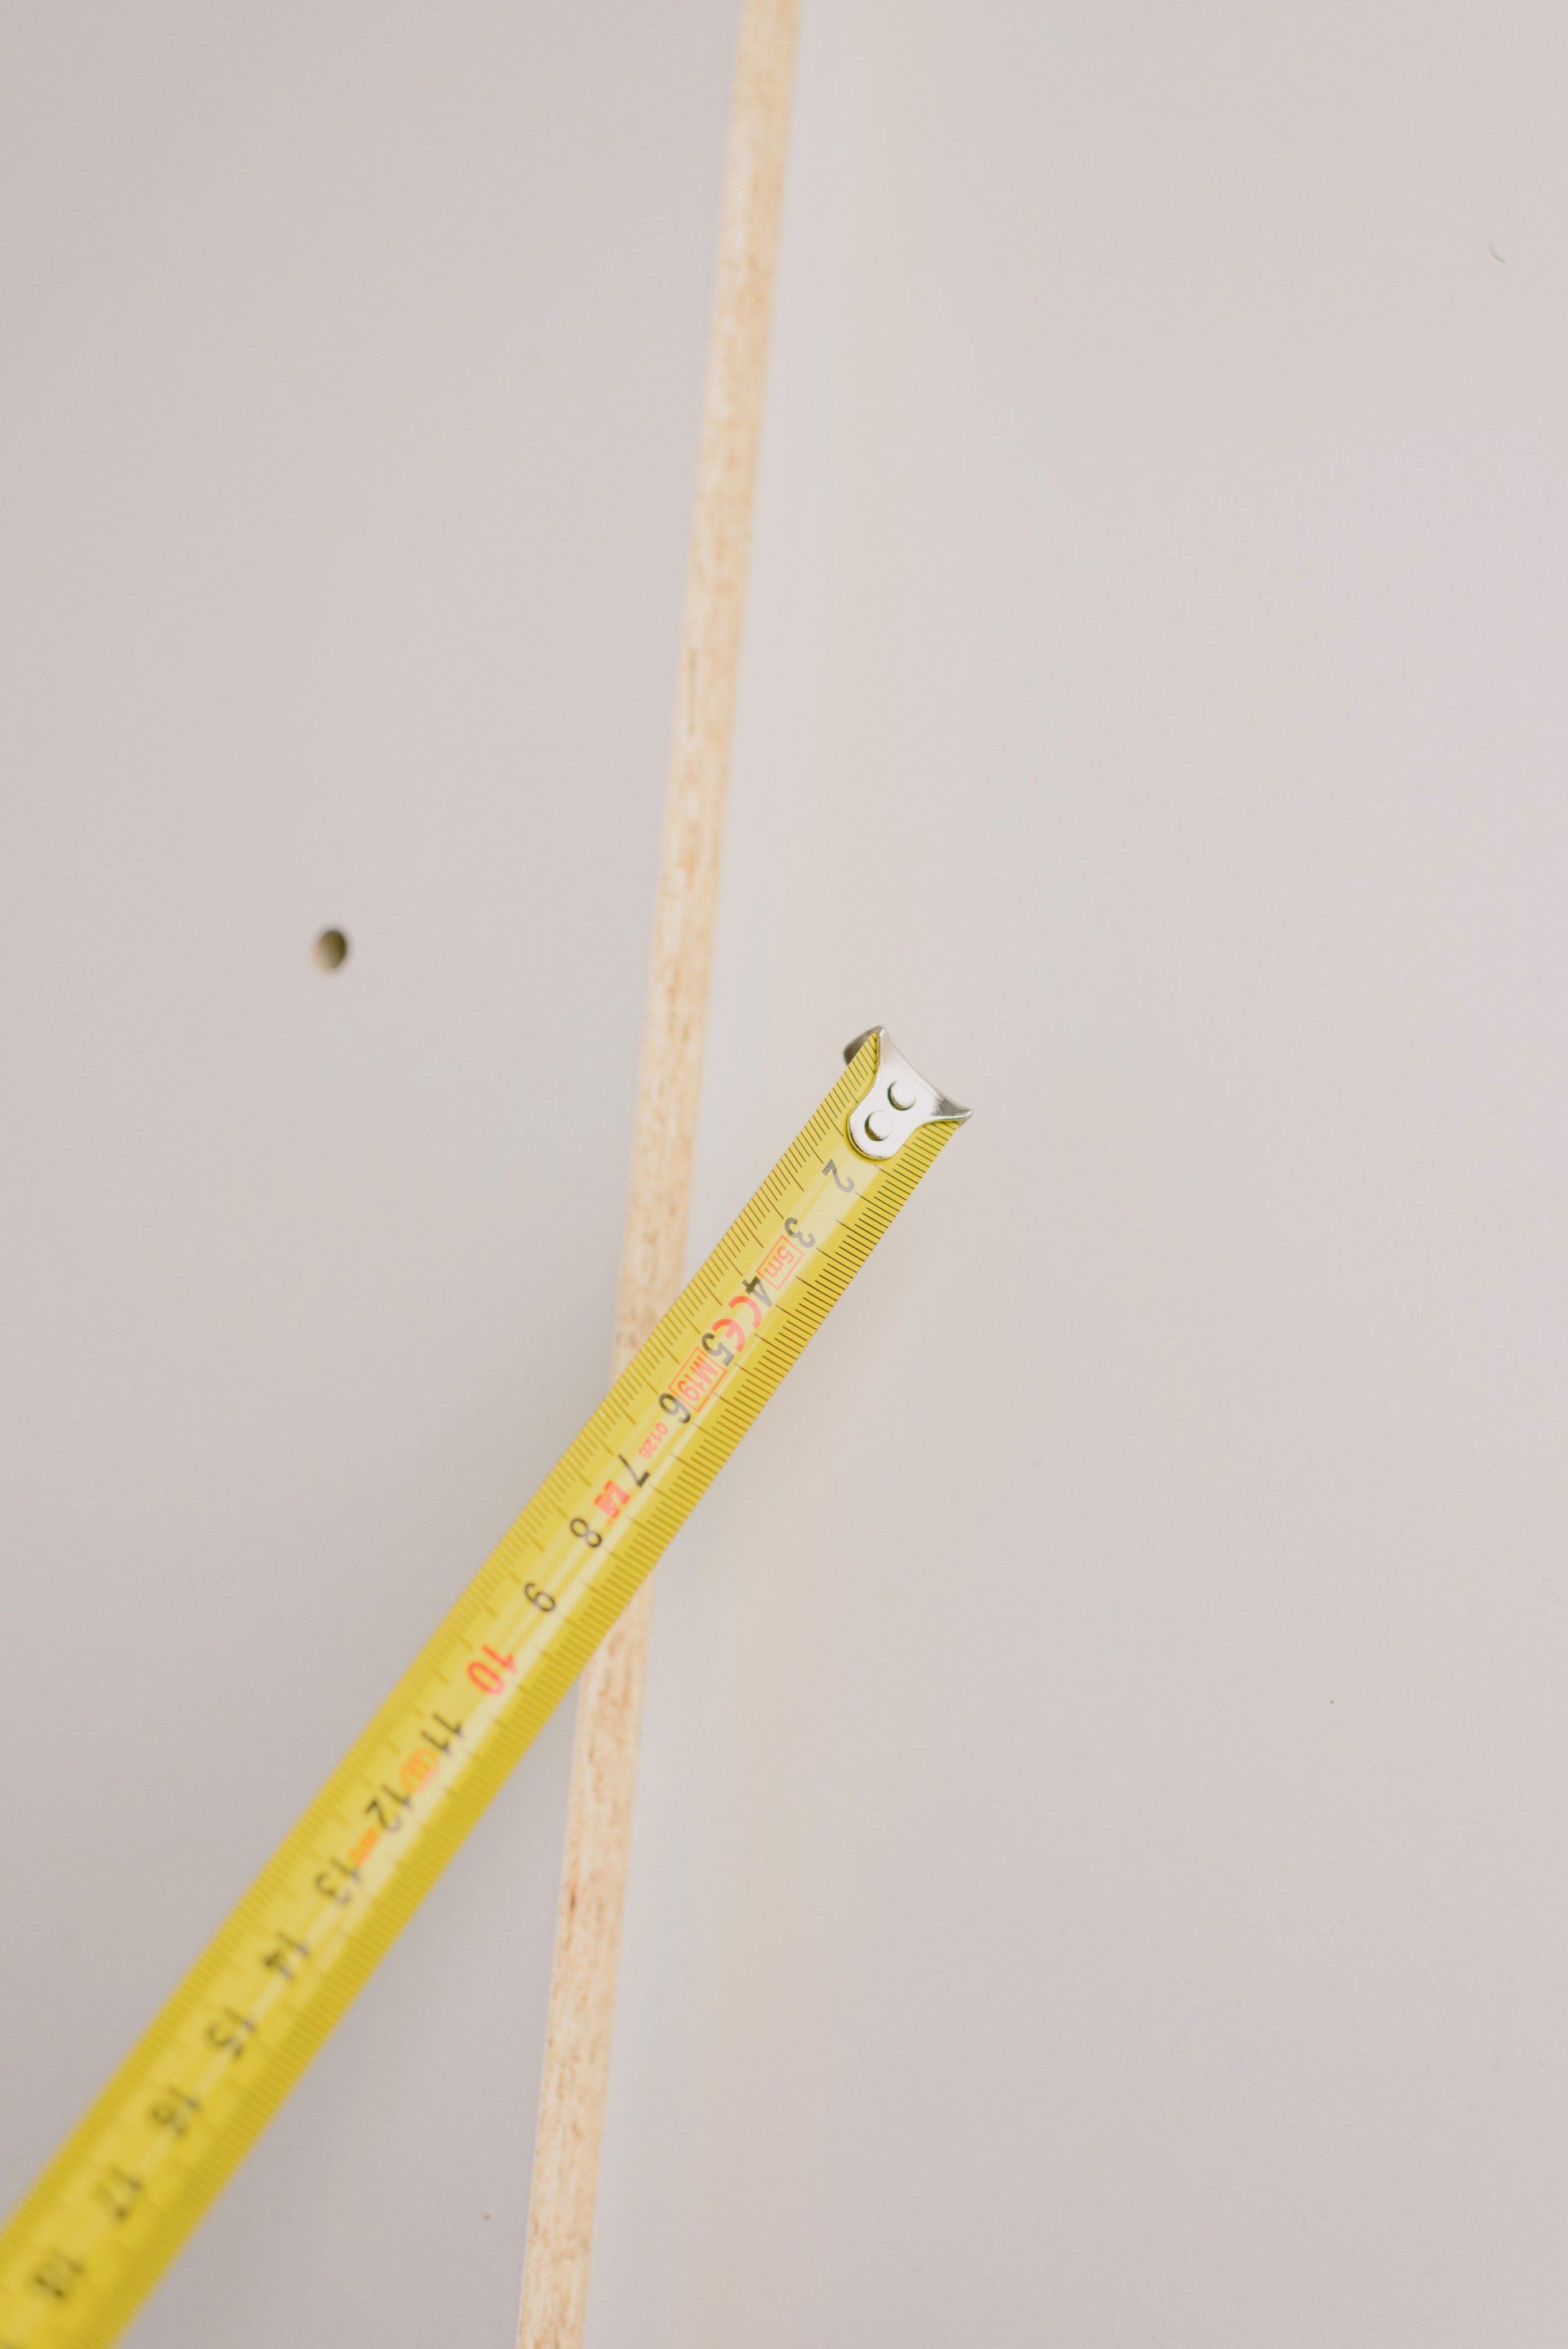 A yellow tape measure is sitting on a white wall.